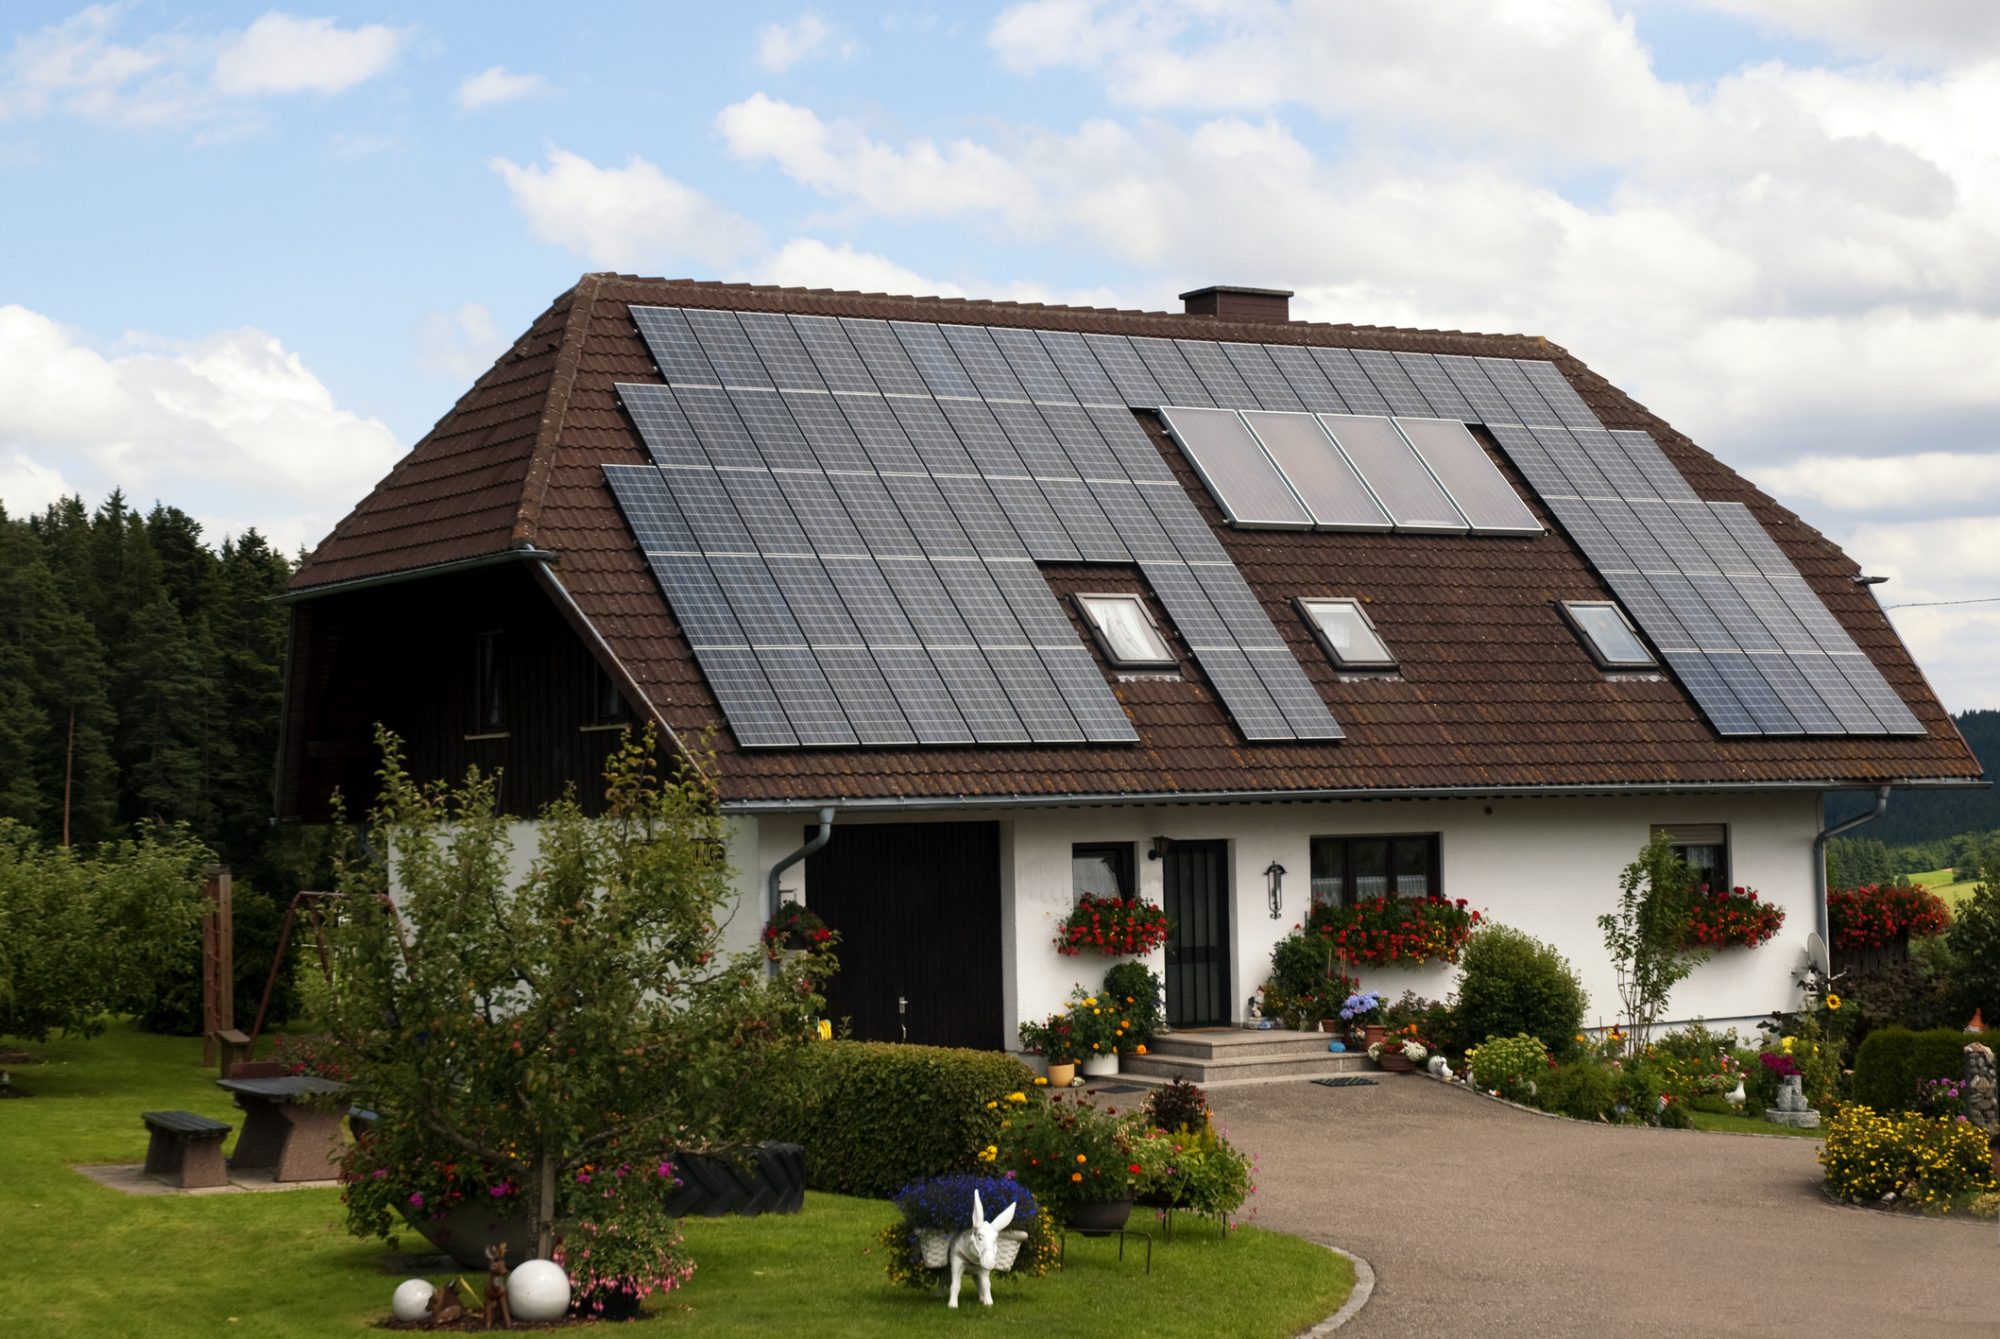 House roof with solar panels